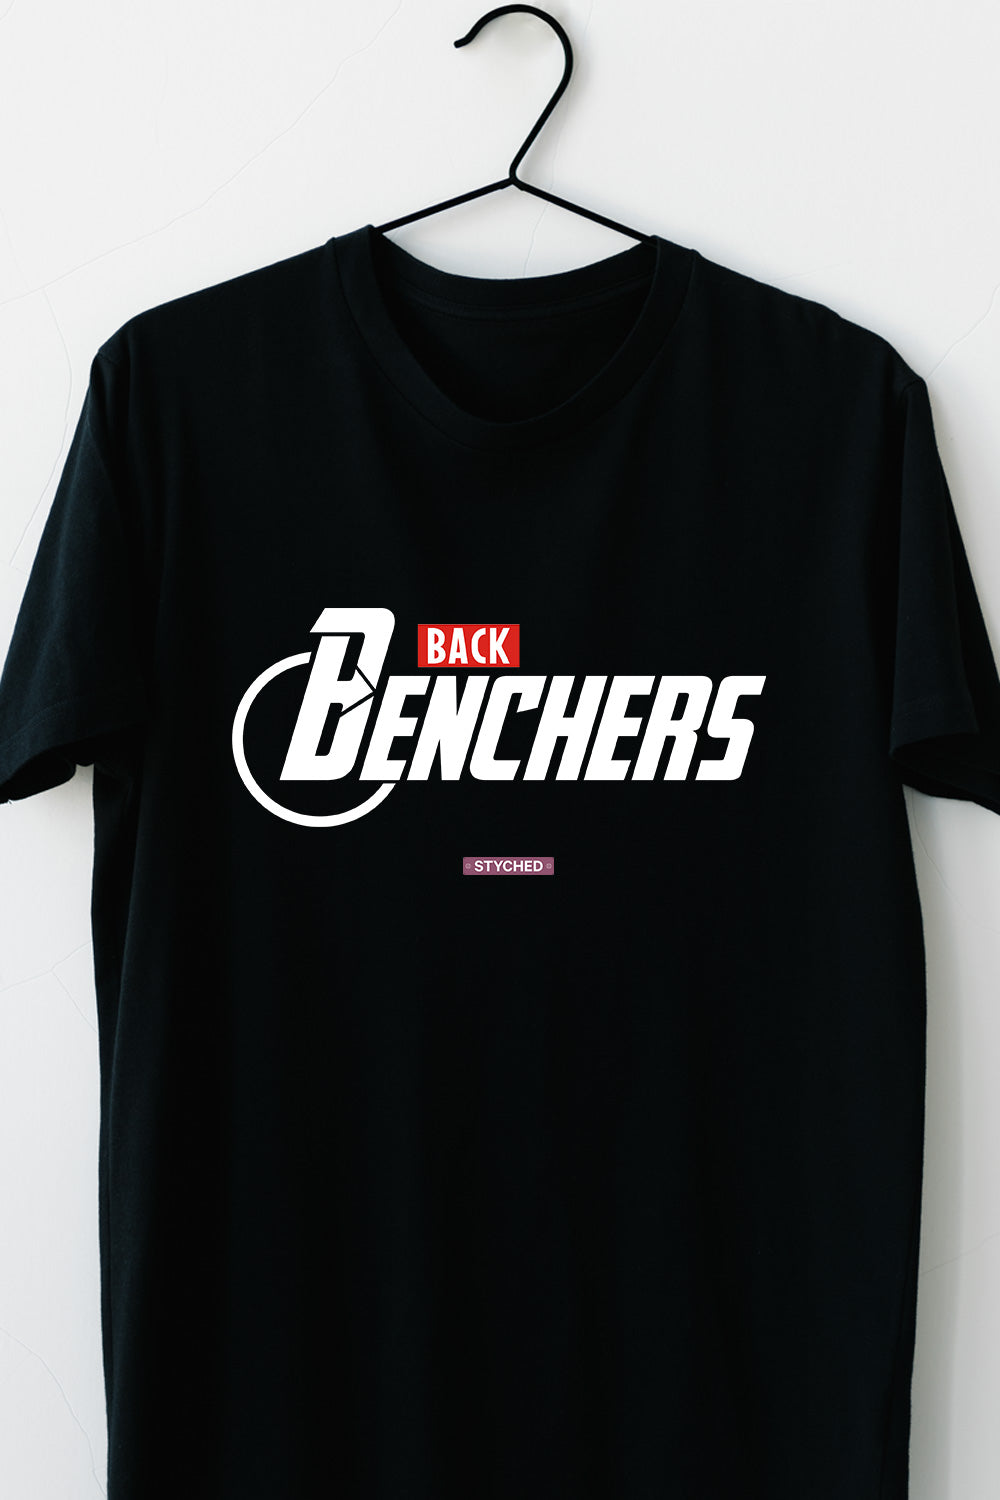 Paytm Exclusive - Back Benchers - Not the Avengers. A whole lot more Swag!